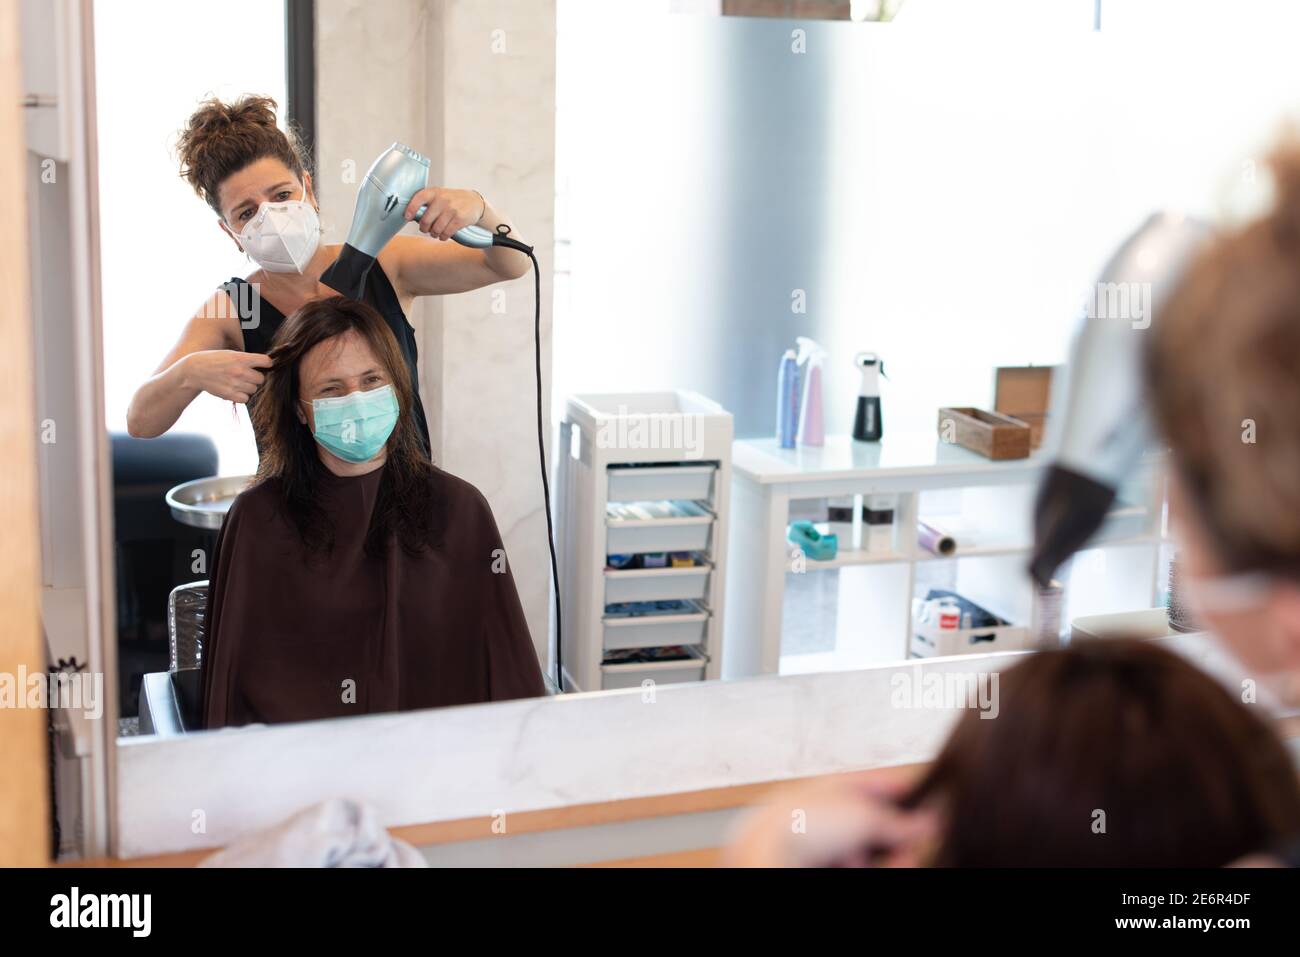 Working during covid-19 or coronavirus concept. A professional hairdresser cutting the hair to a client, reflected in the mirror with copy space. Stock Photo